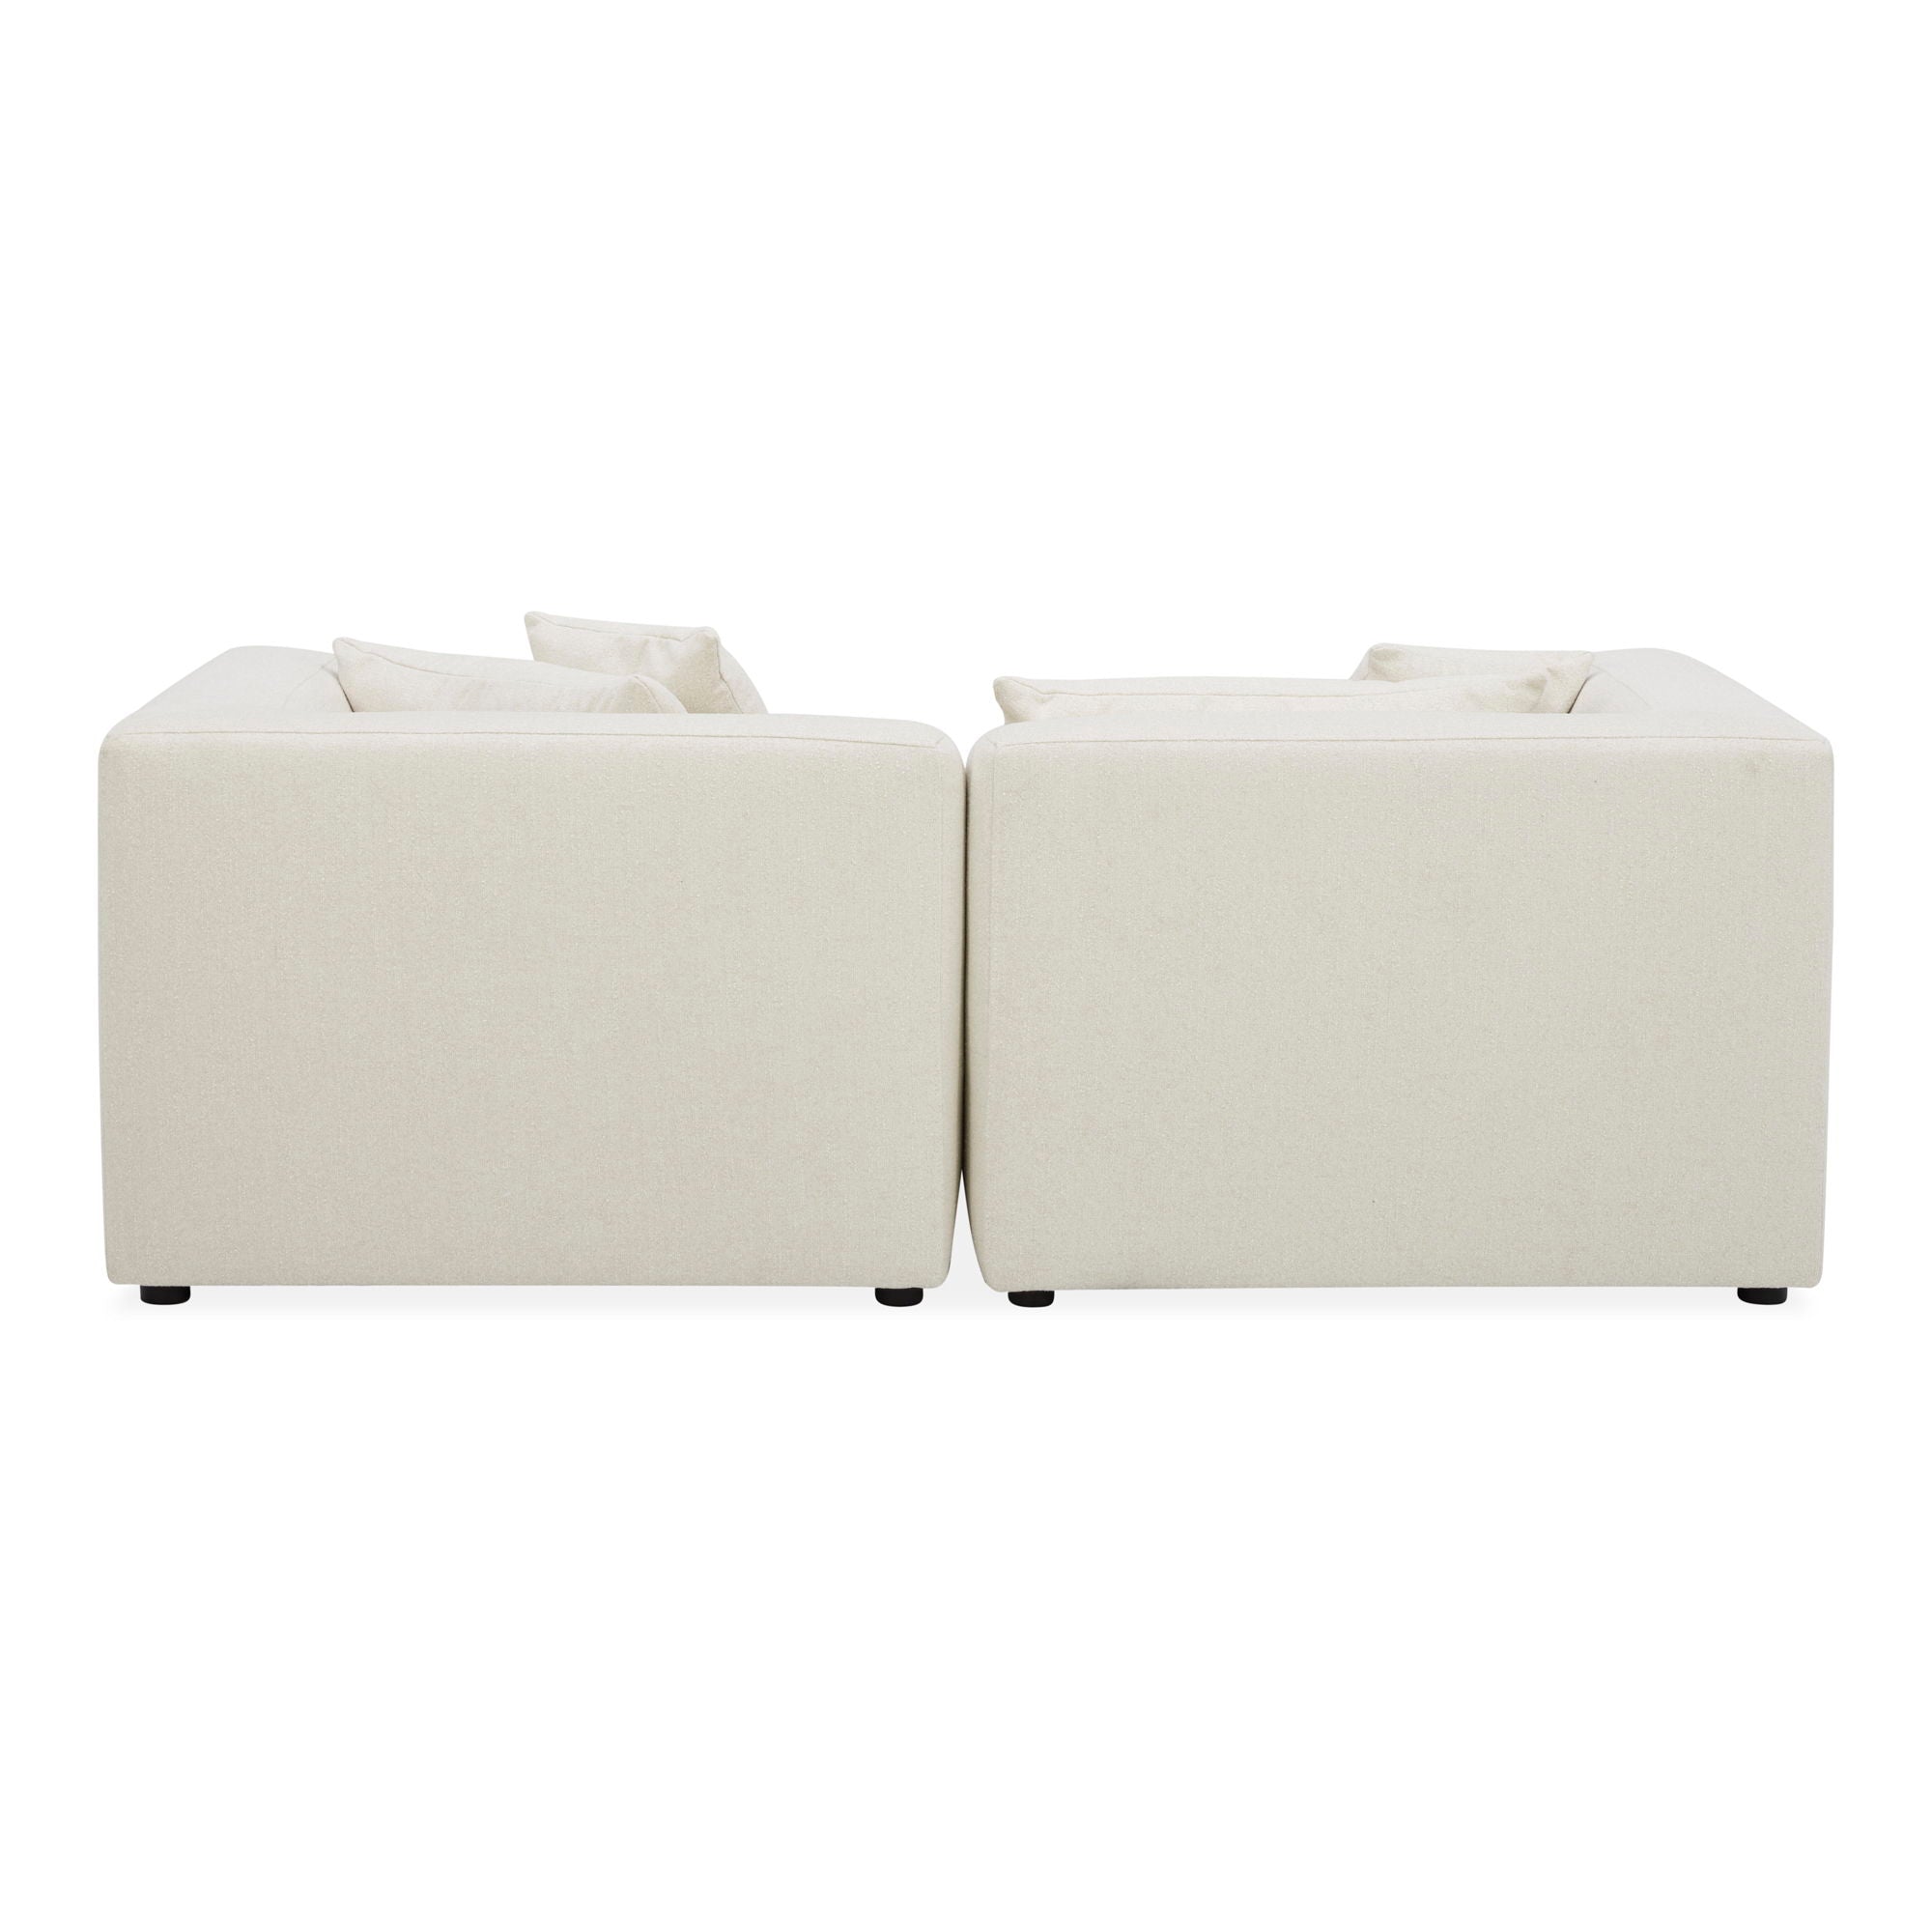 Lowtide - Nook Modular Sectional - Warm White-Stationary Sectionals-American Furniture Outlet